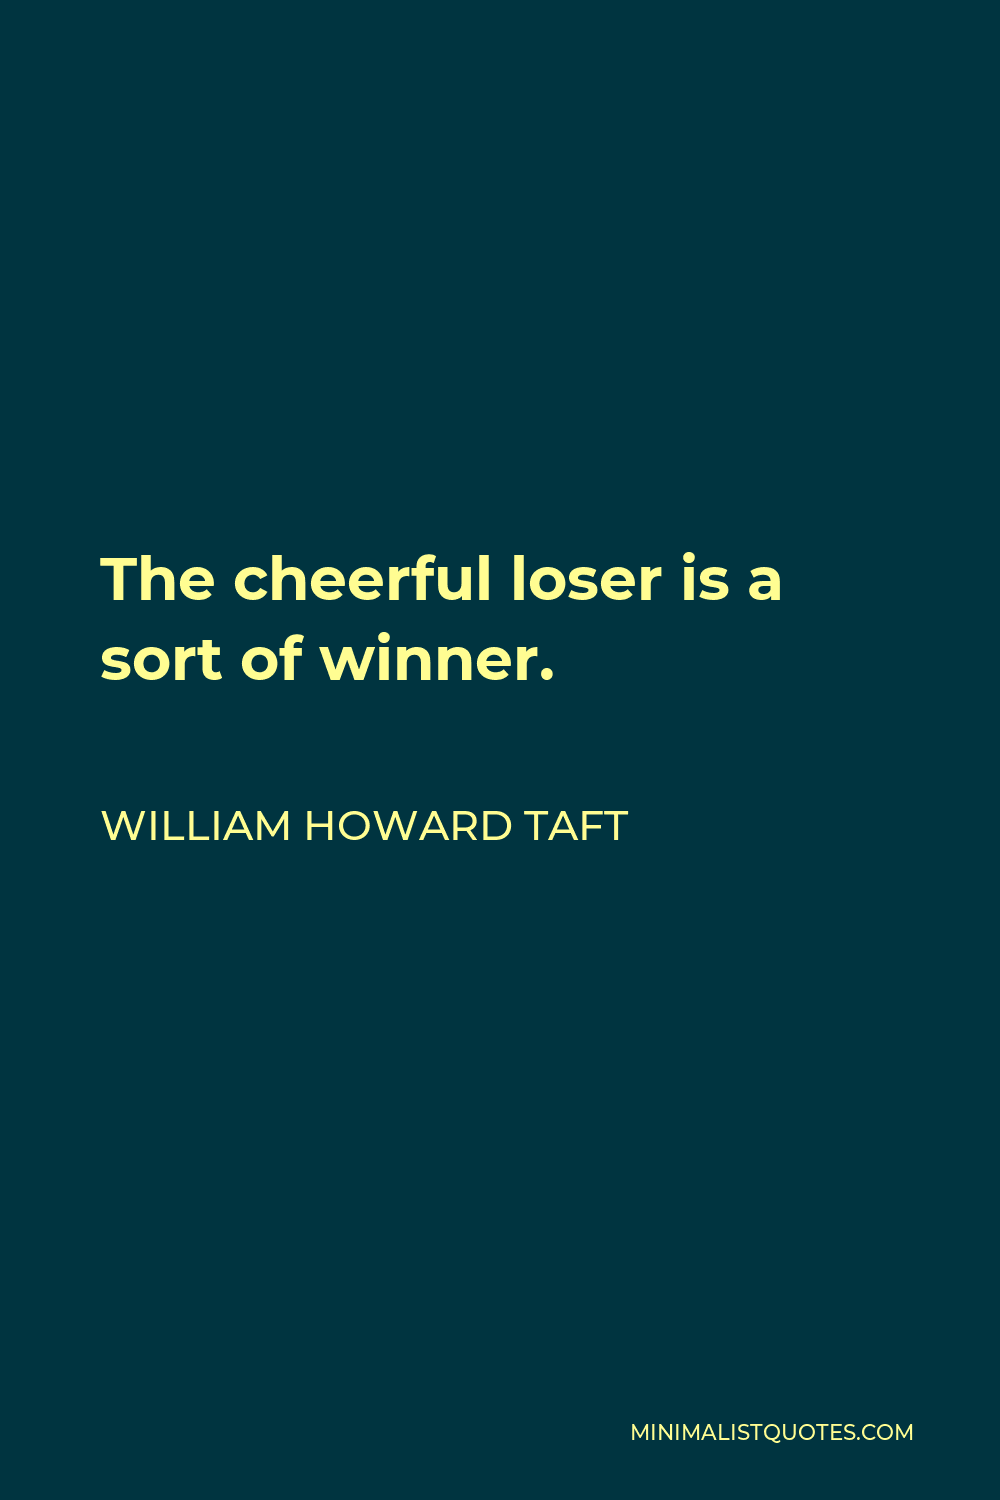 William Howard Taft Quote - The cheerful loser is a sort of winner.